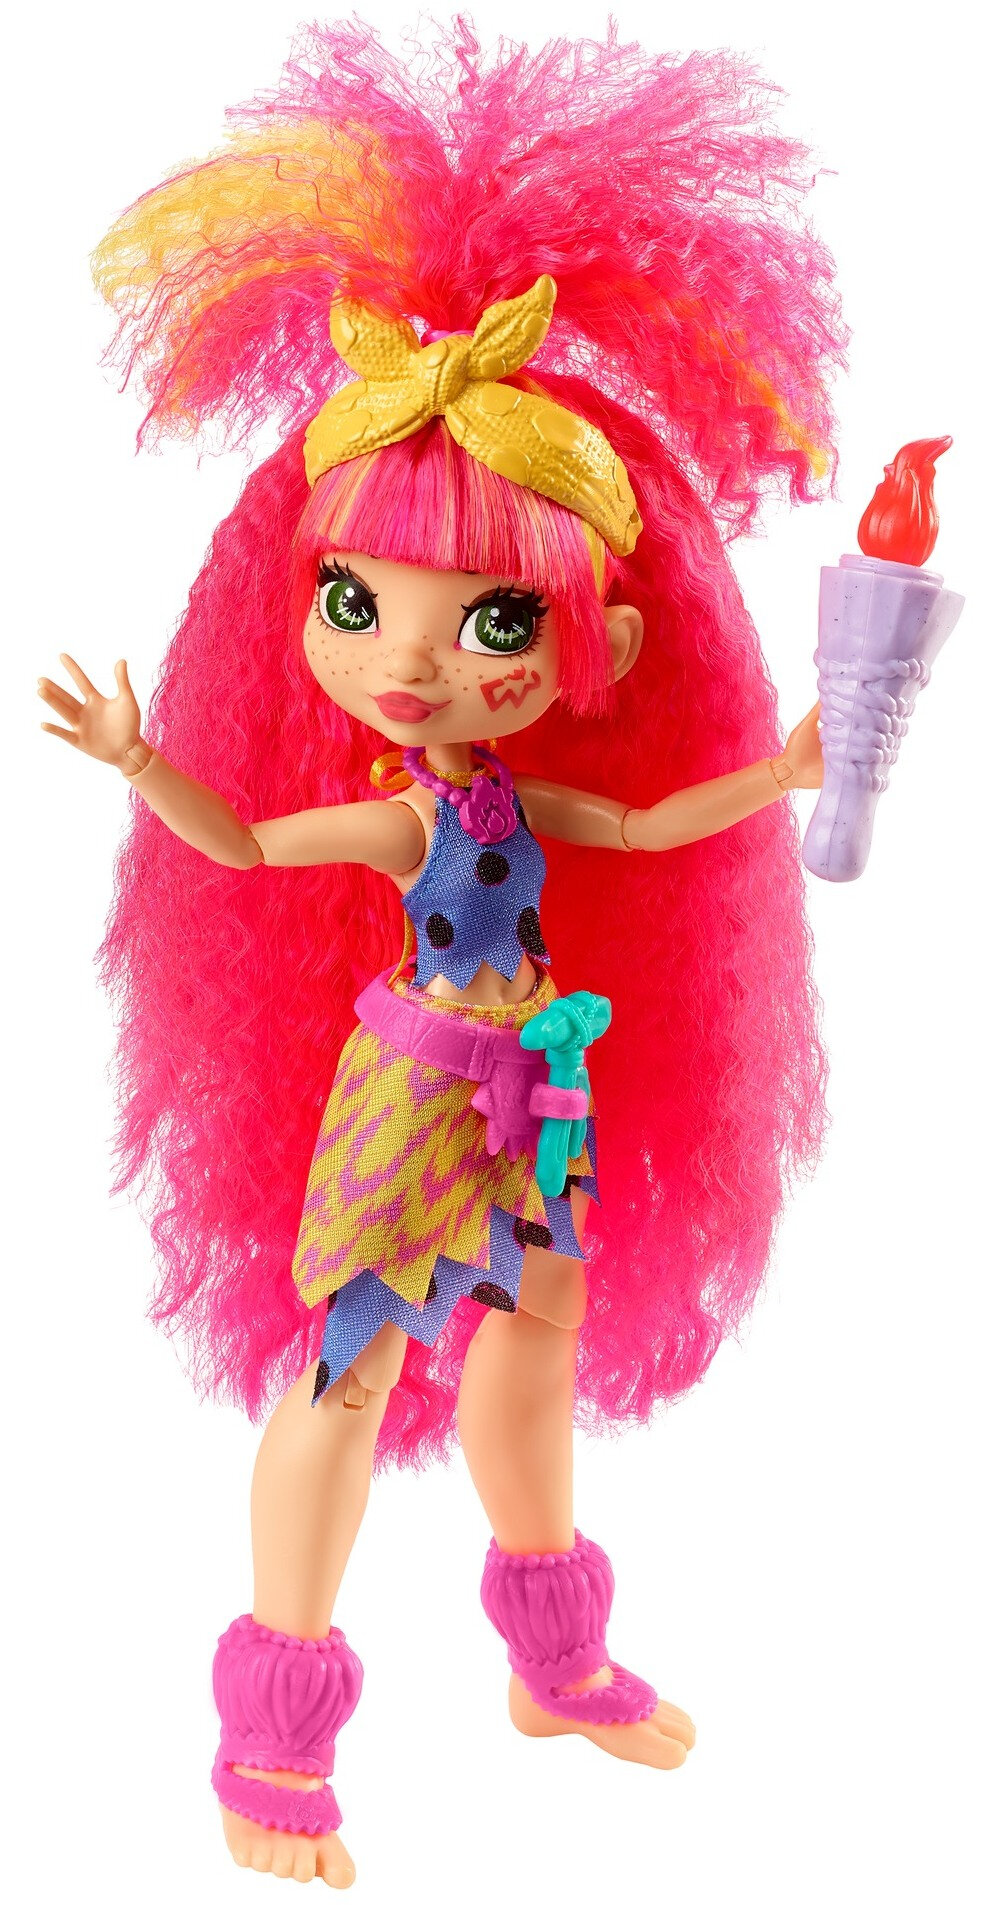 Cave Club Emberly Doll (8 - 10-Inch) Prehistoric Fashion Doll with Dinosaur Pet - image 1 of 7